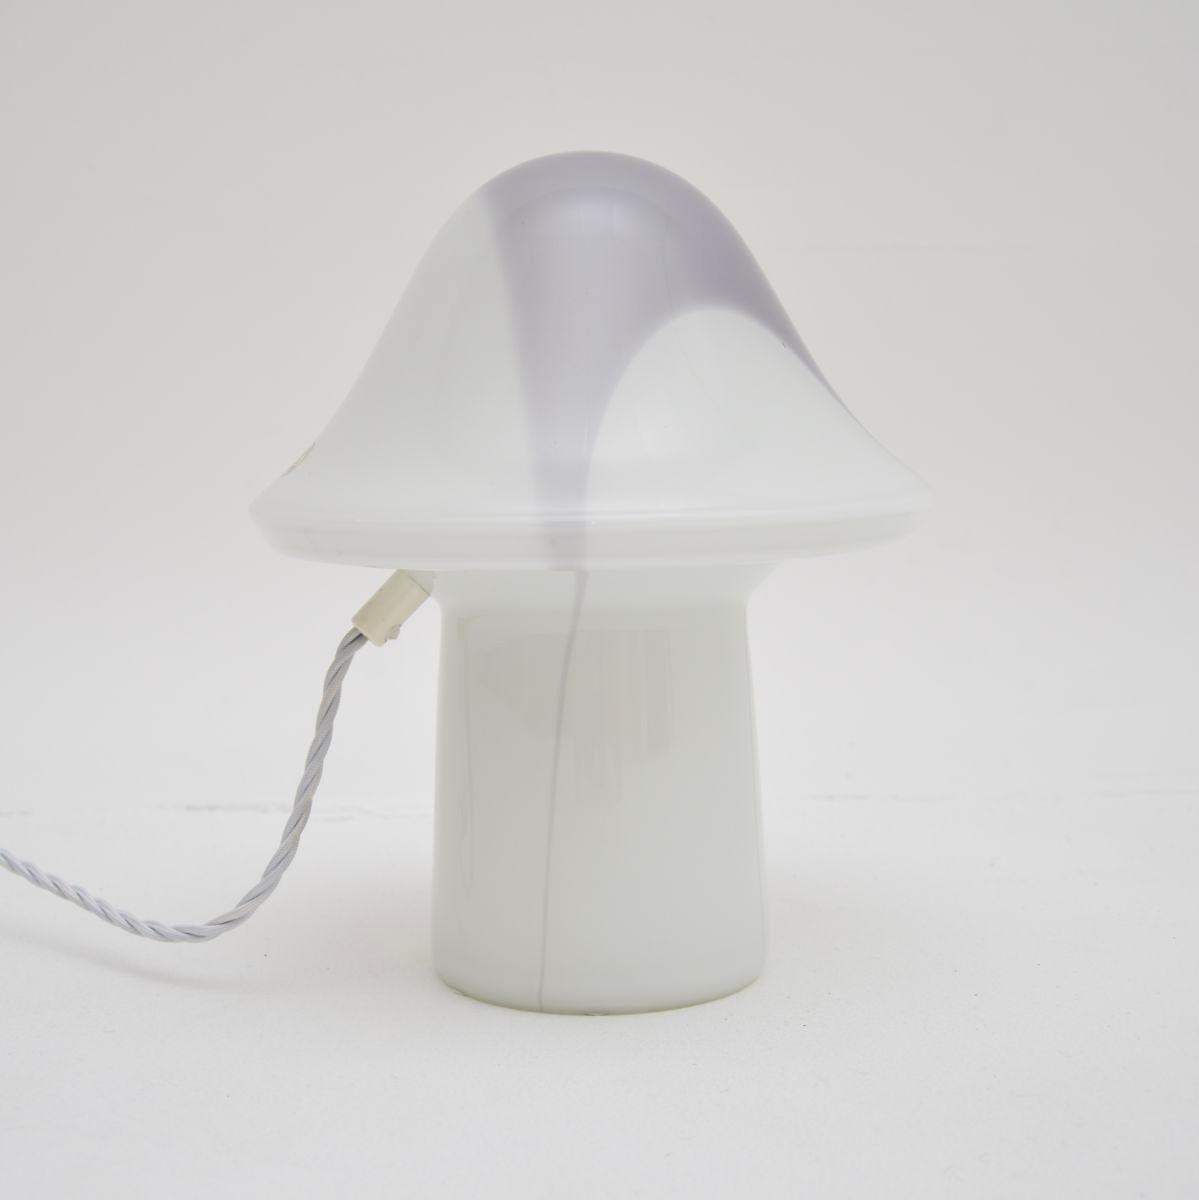 A stylish and very well made vintage Murano glass mushroom lamp by Peil and Putzler. This is hand blown Italian Murano glass, imported to Germany and made by Peil and Putzler in the 1970’s.

The quality is outstanding, this is a lovely size and has